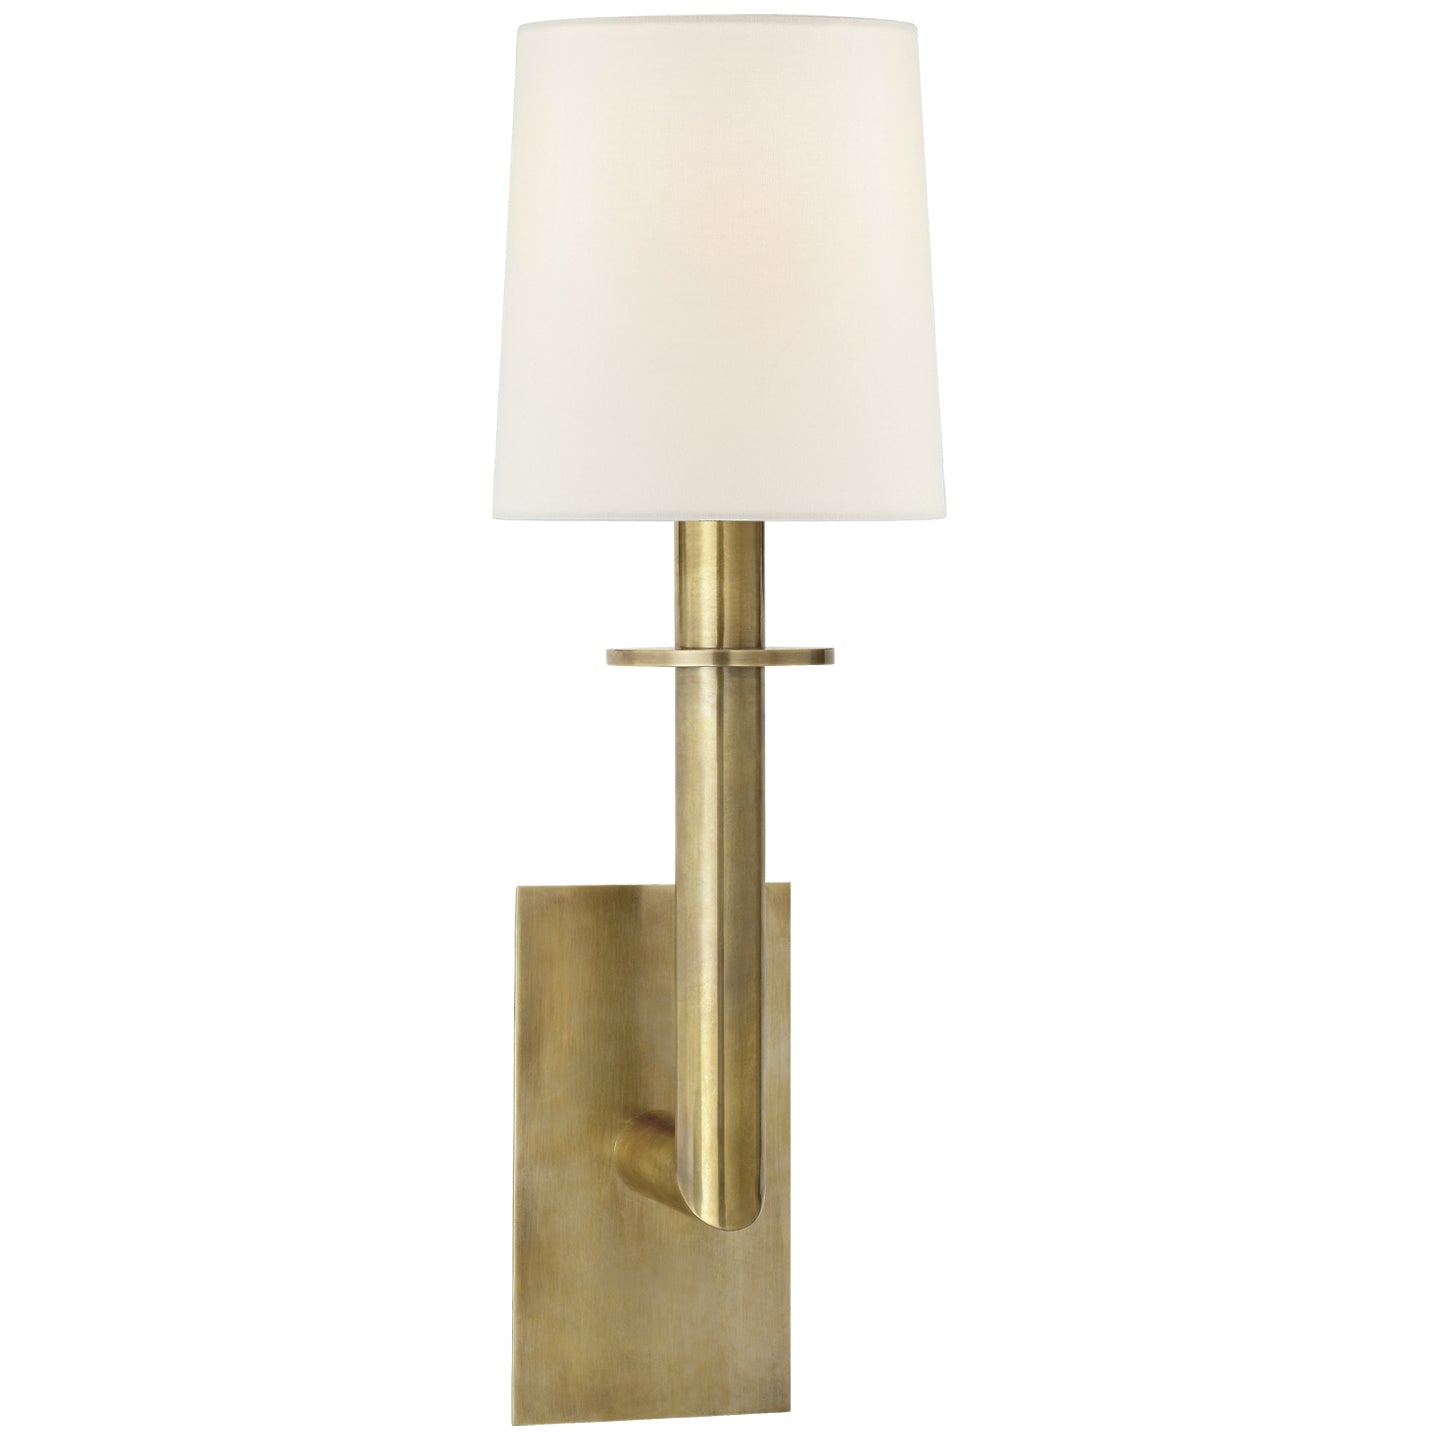 Load image into Gallery viewer, Visual Comfort Signature - SP 2017HAB-L - One Light Wall Sconce - Dalston - Hand-Rubbed Antique Brass
